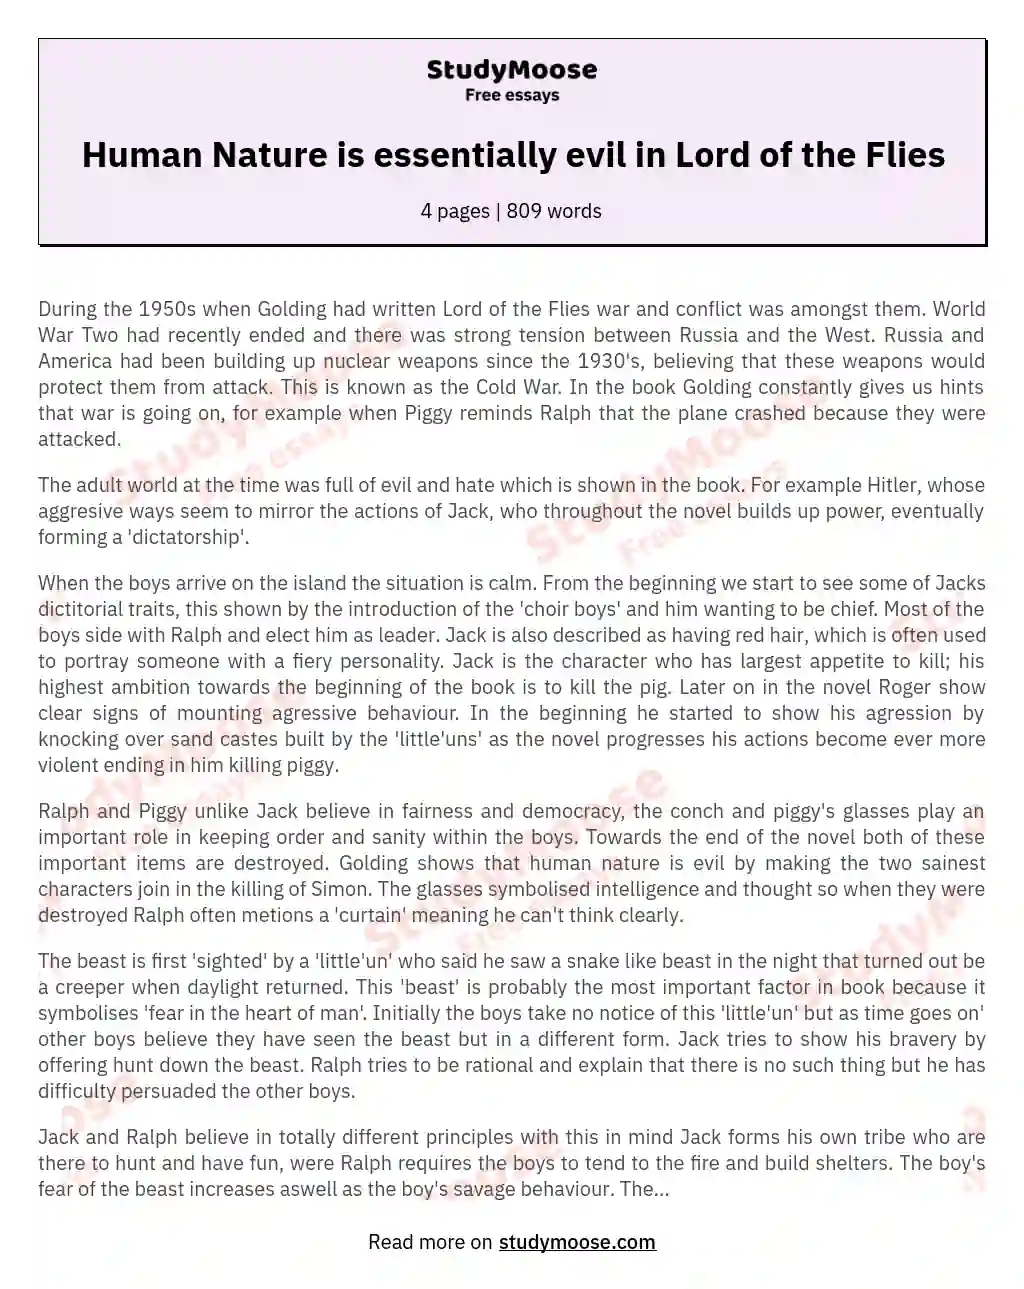 Human Nature is essentially evil in Lord of the Flies